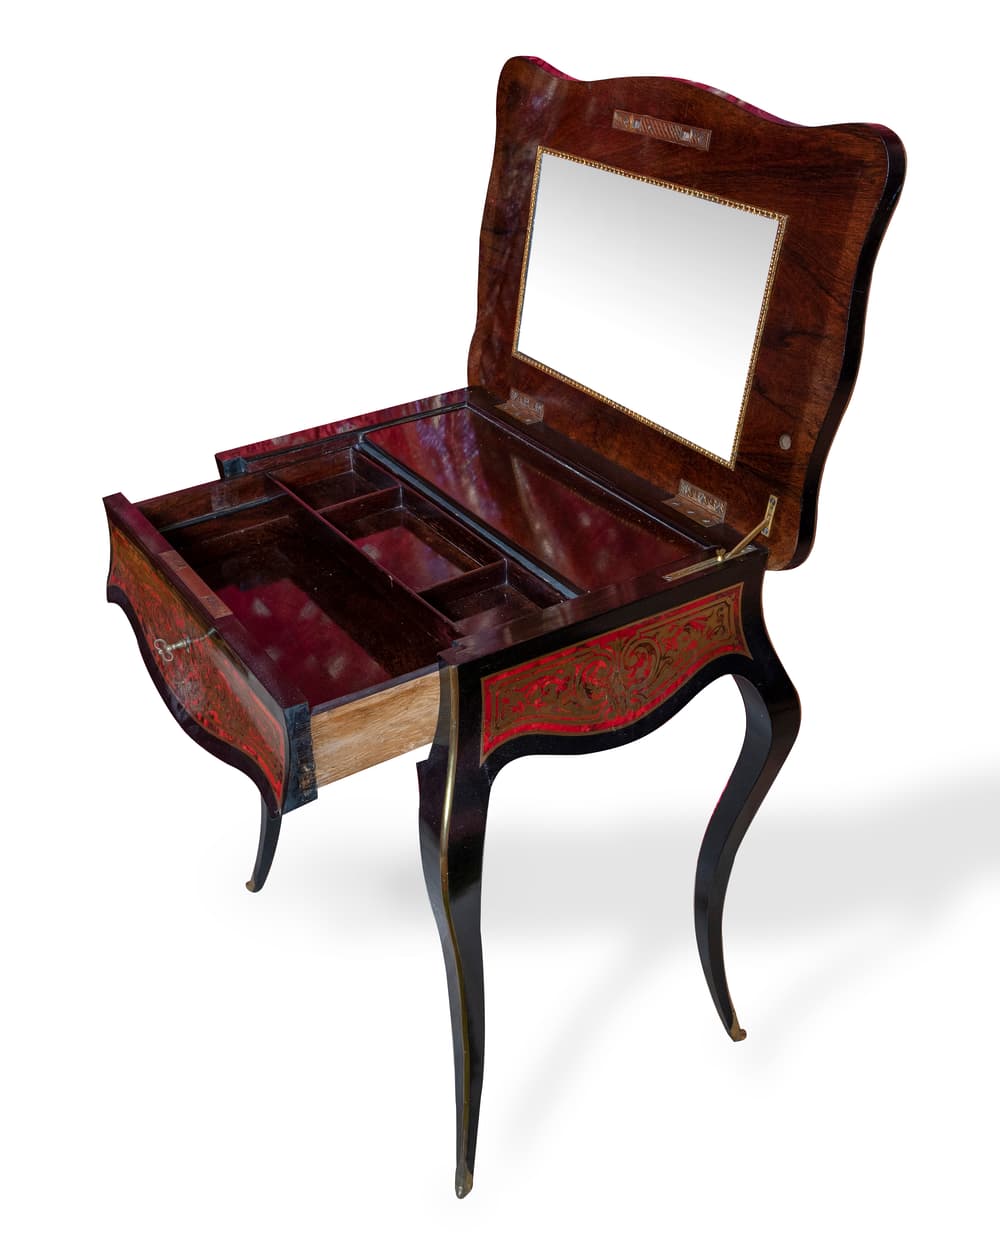 BOULLE MARQUETRY AND GILT BRONZE DRESSING TABLE France, Napoleon III period